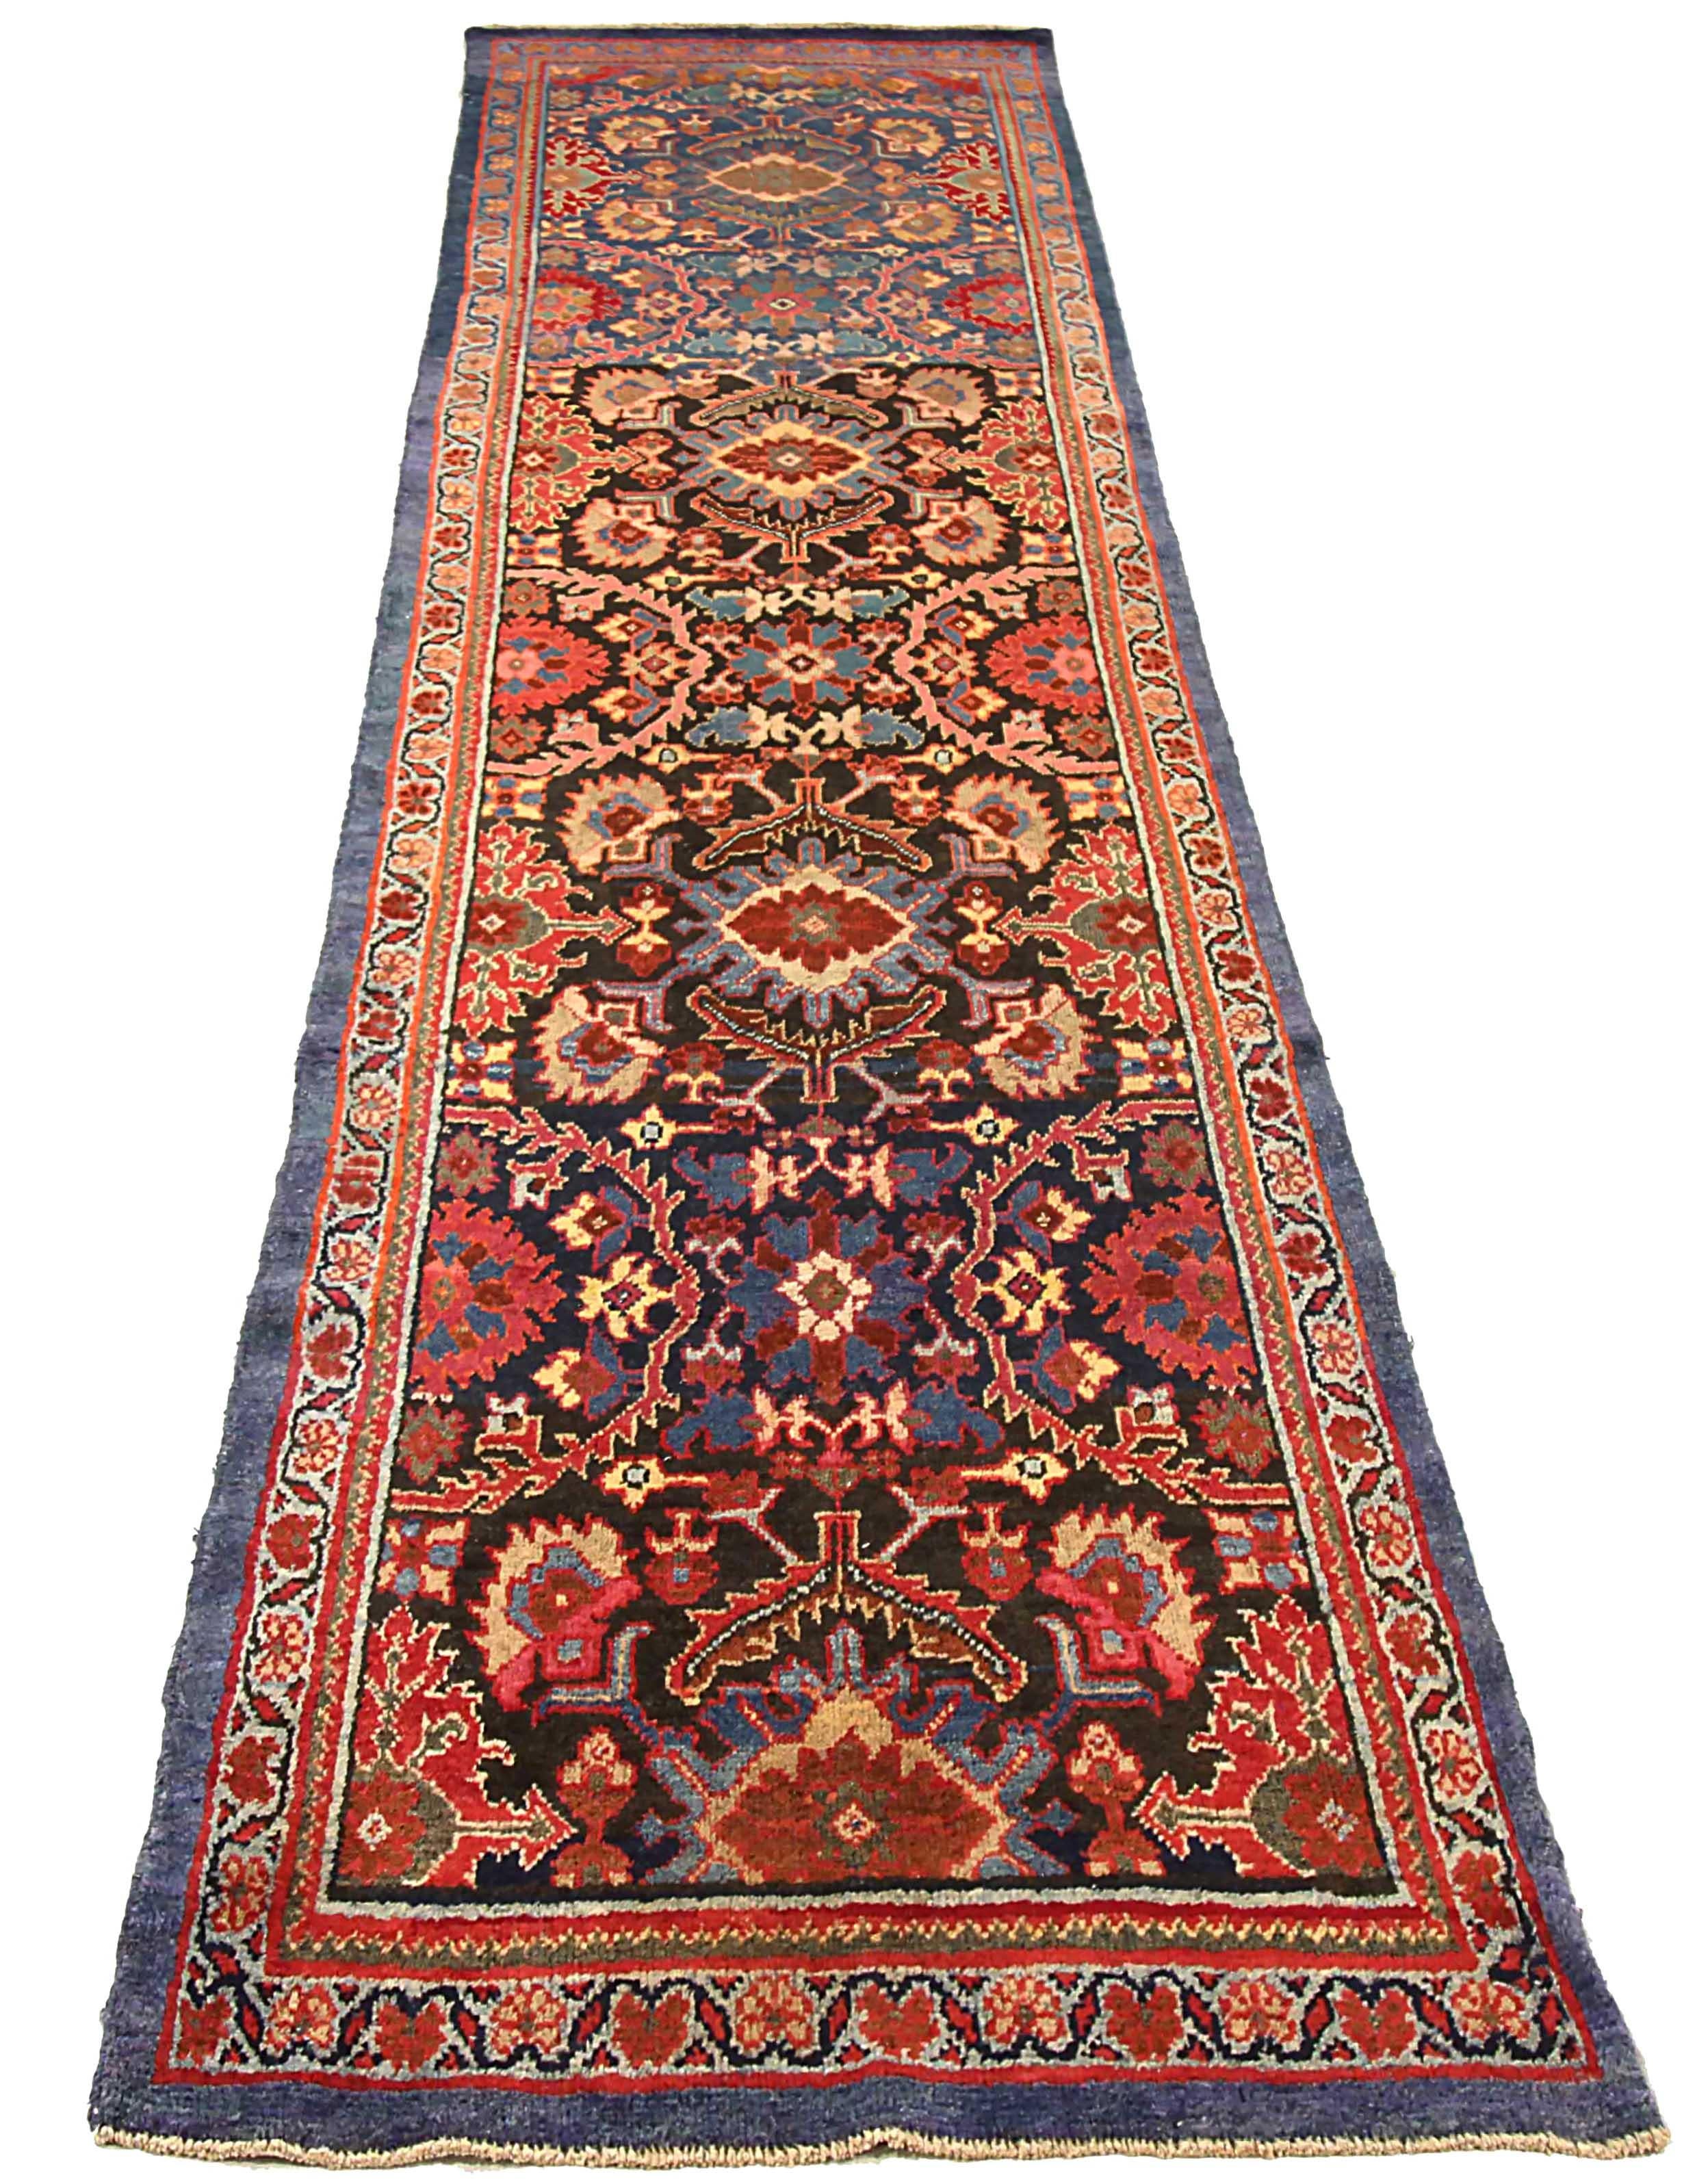 Antique Persian runner rug handwoven from the finest sheep’s wool. It’s colored with all-natural vegetable dyes that are safe for humans and pets. It’s a traditional Sultanabad design handwoven by expert artisans. It’s a lovely runner rug that can